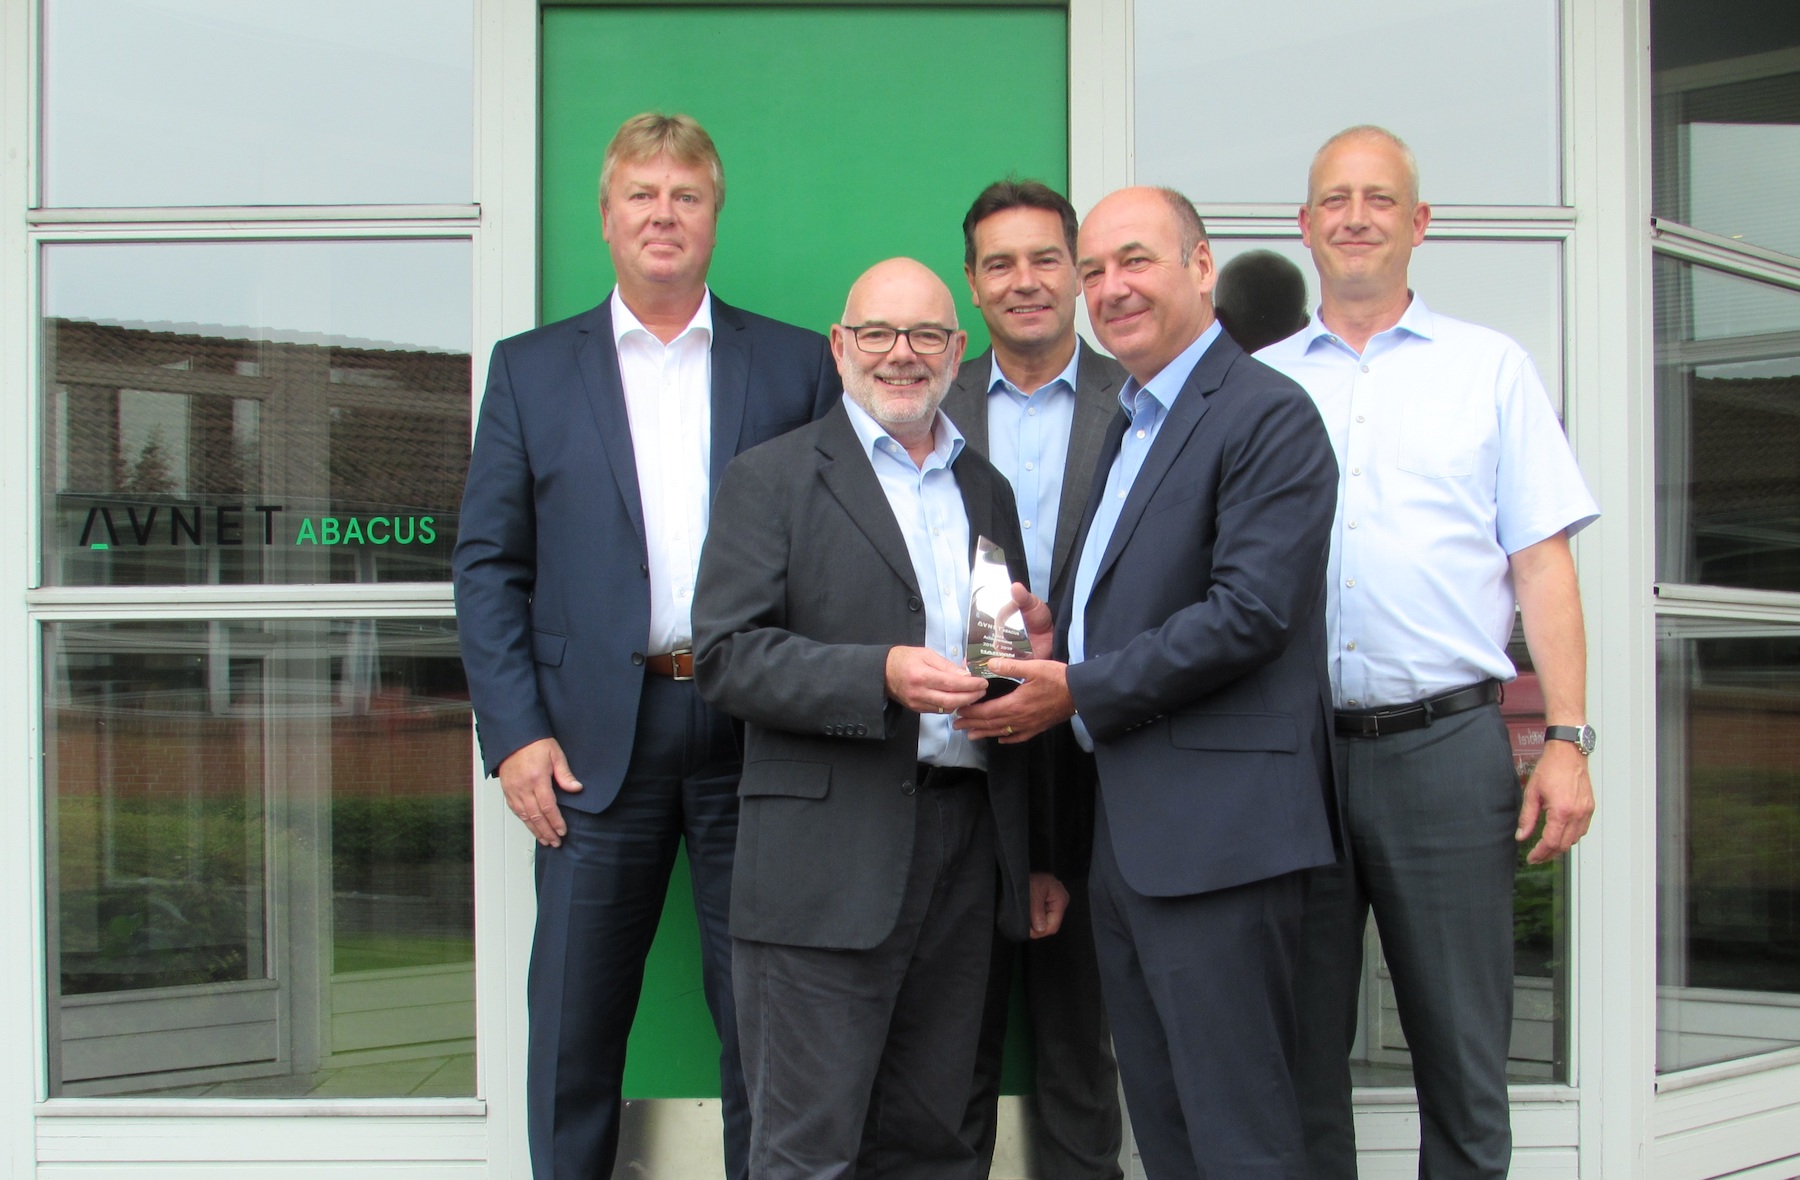 September 24, 2019 Connector Industry News - Harwin presents Avnet with Sales Excellence Award